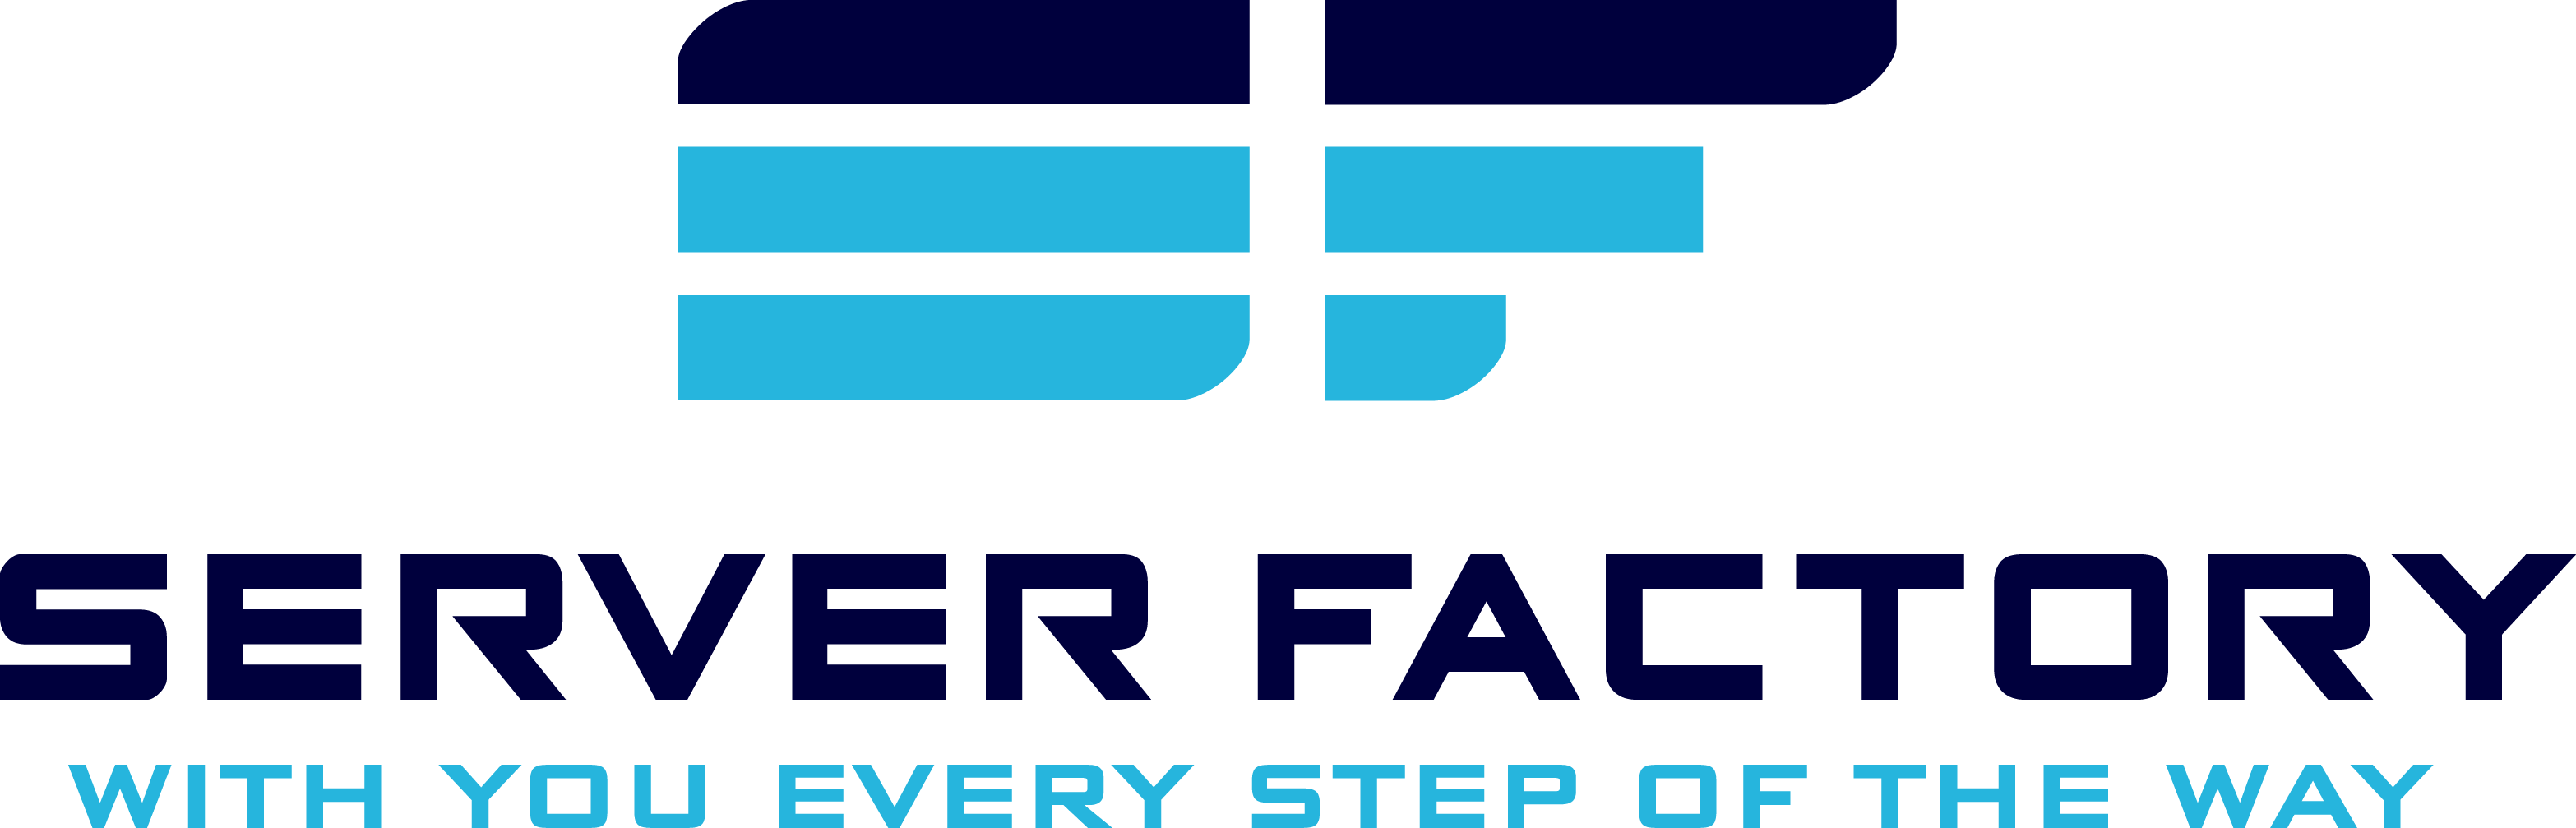 Server Factory Limited